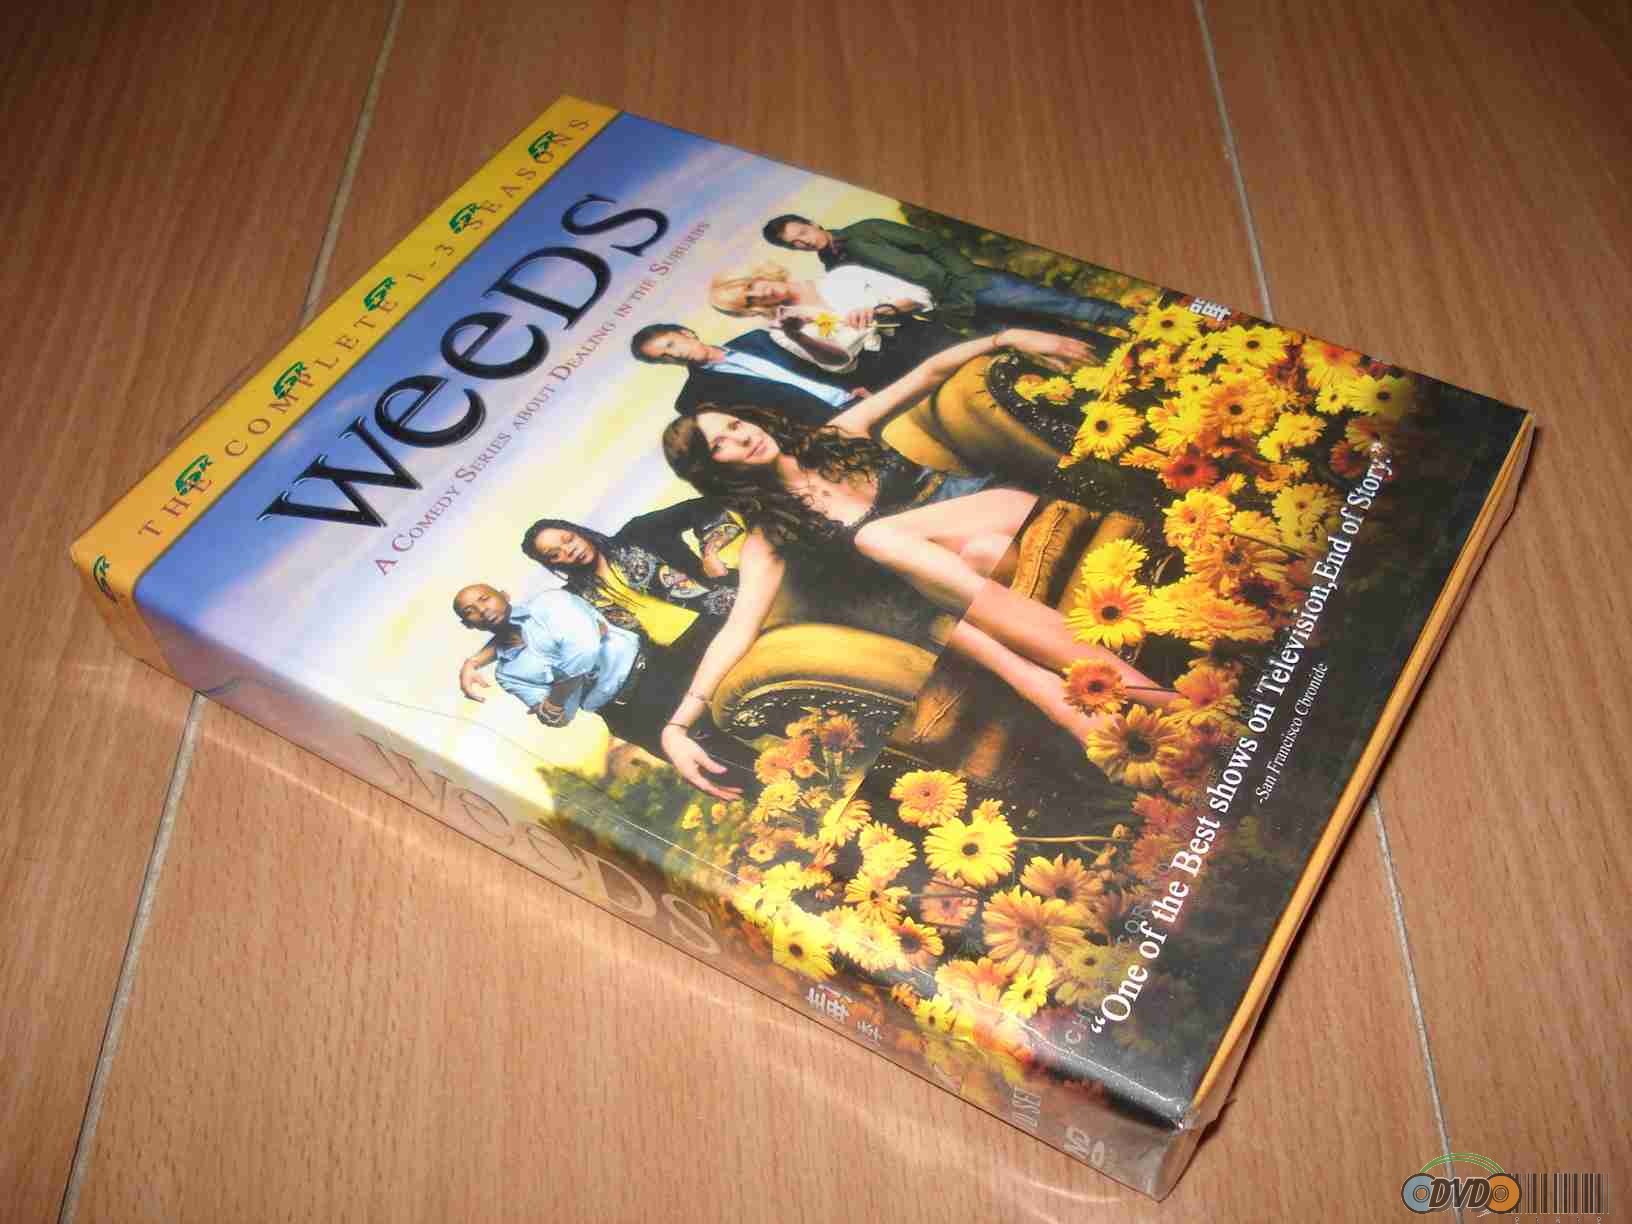 Weeds COMPLETE SEASONS 1-3 DVDS BOXSET